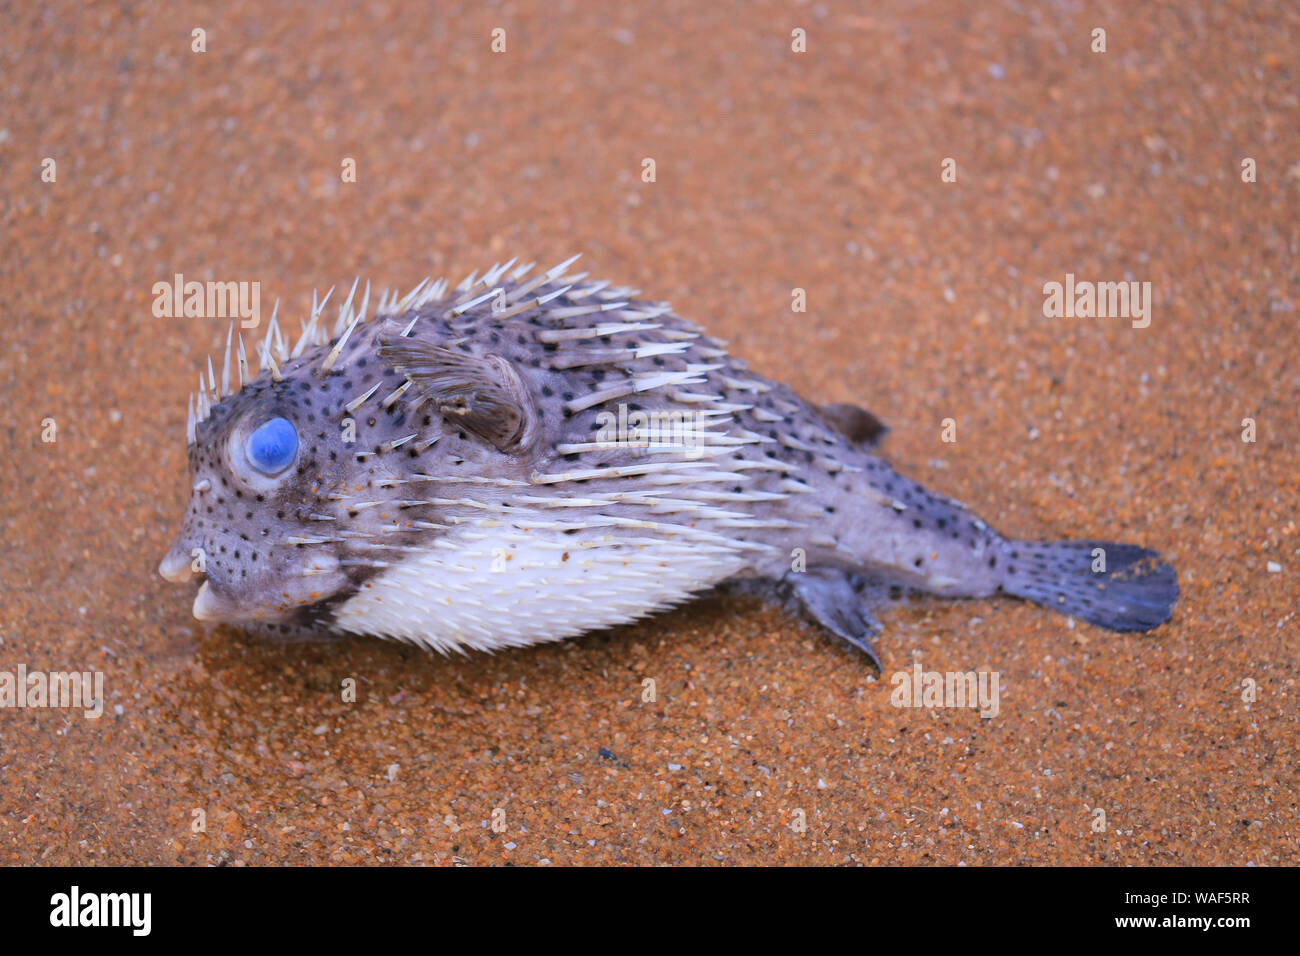 Dead puffer fish on the sand Stock Photo - Alamy